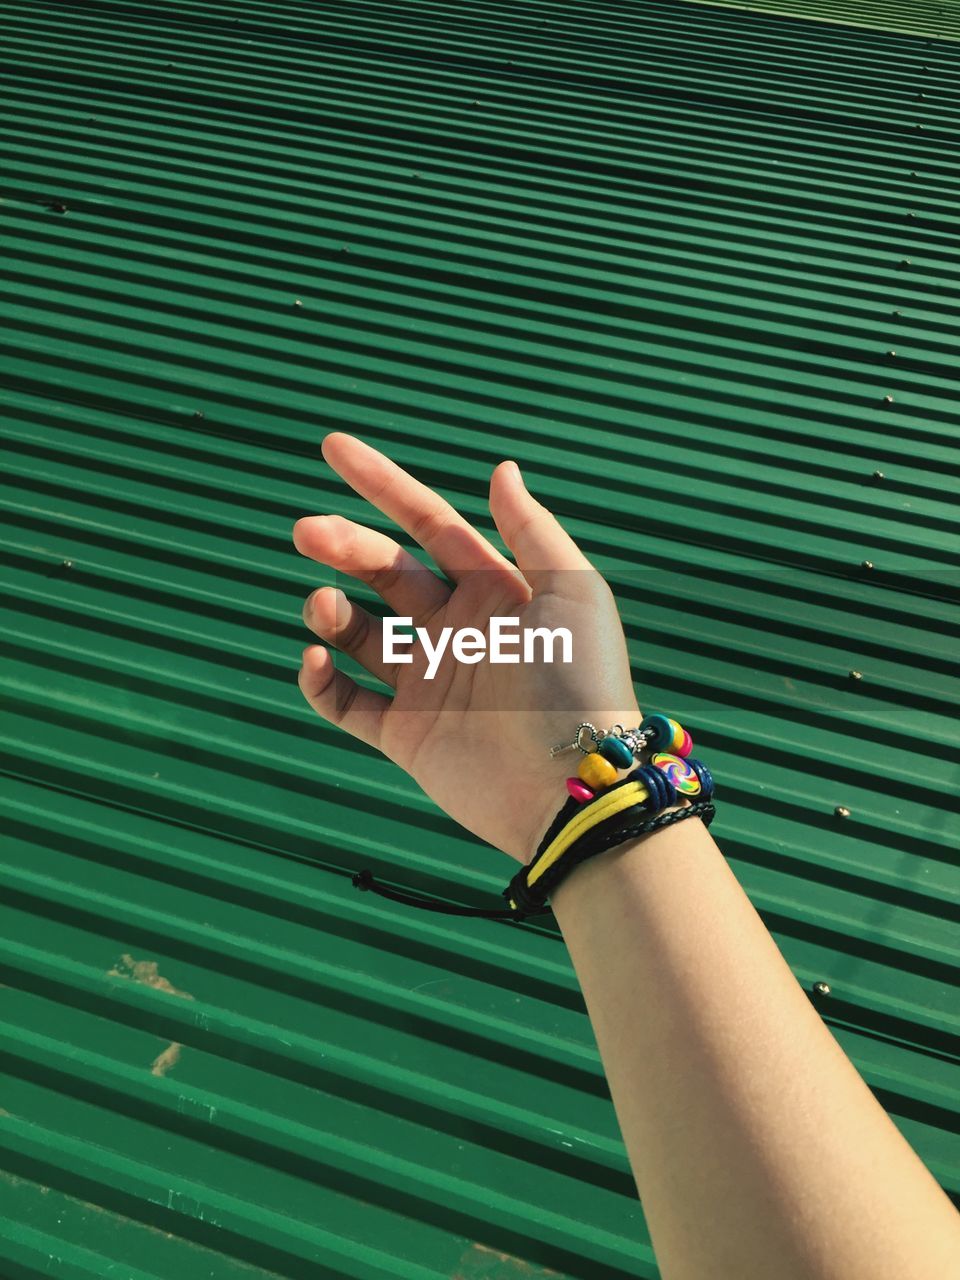 Cropped hand by green corrugated iron